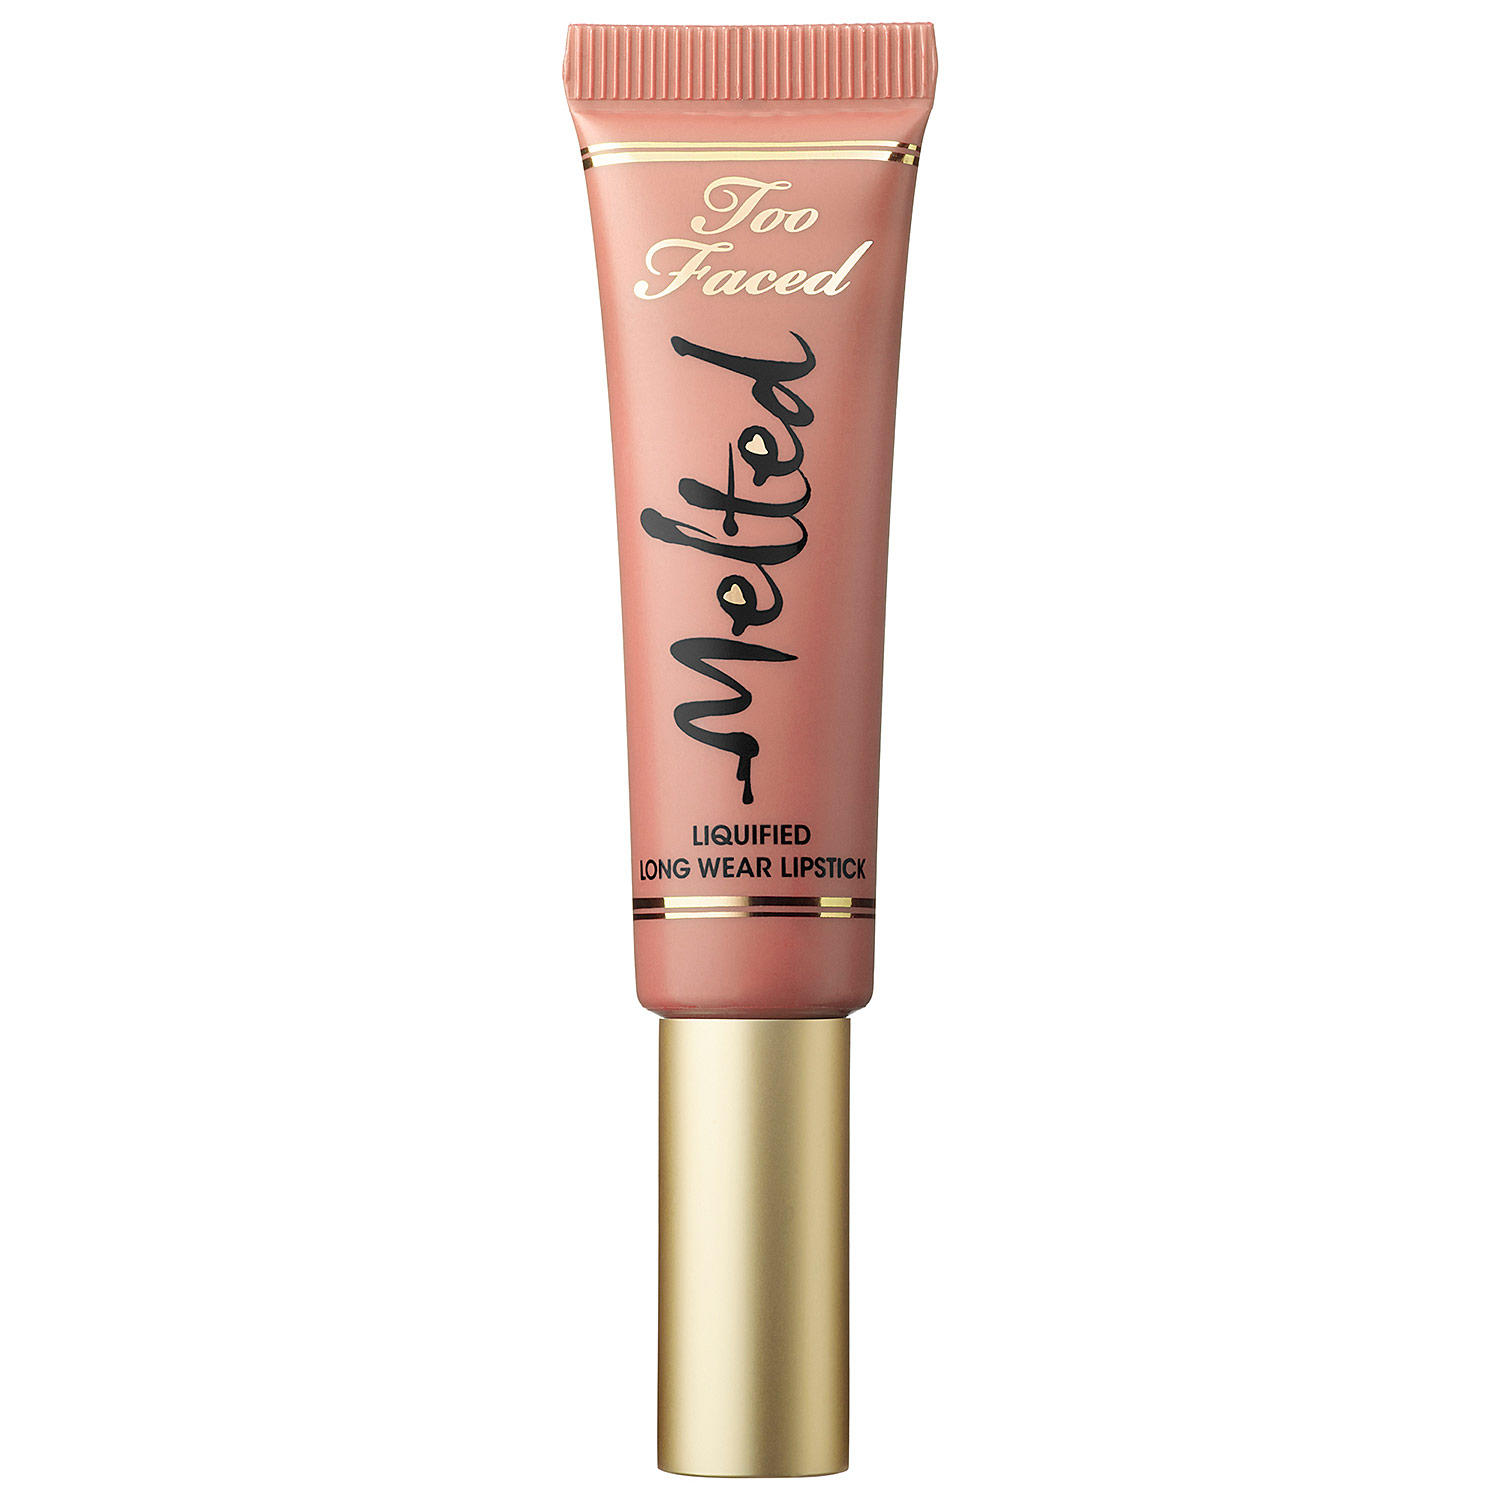 Too Faced Melted Liquified Long Wear Lipstick Melted Nude